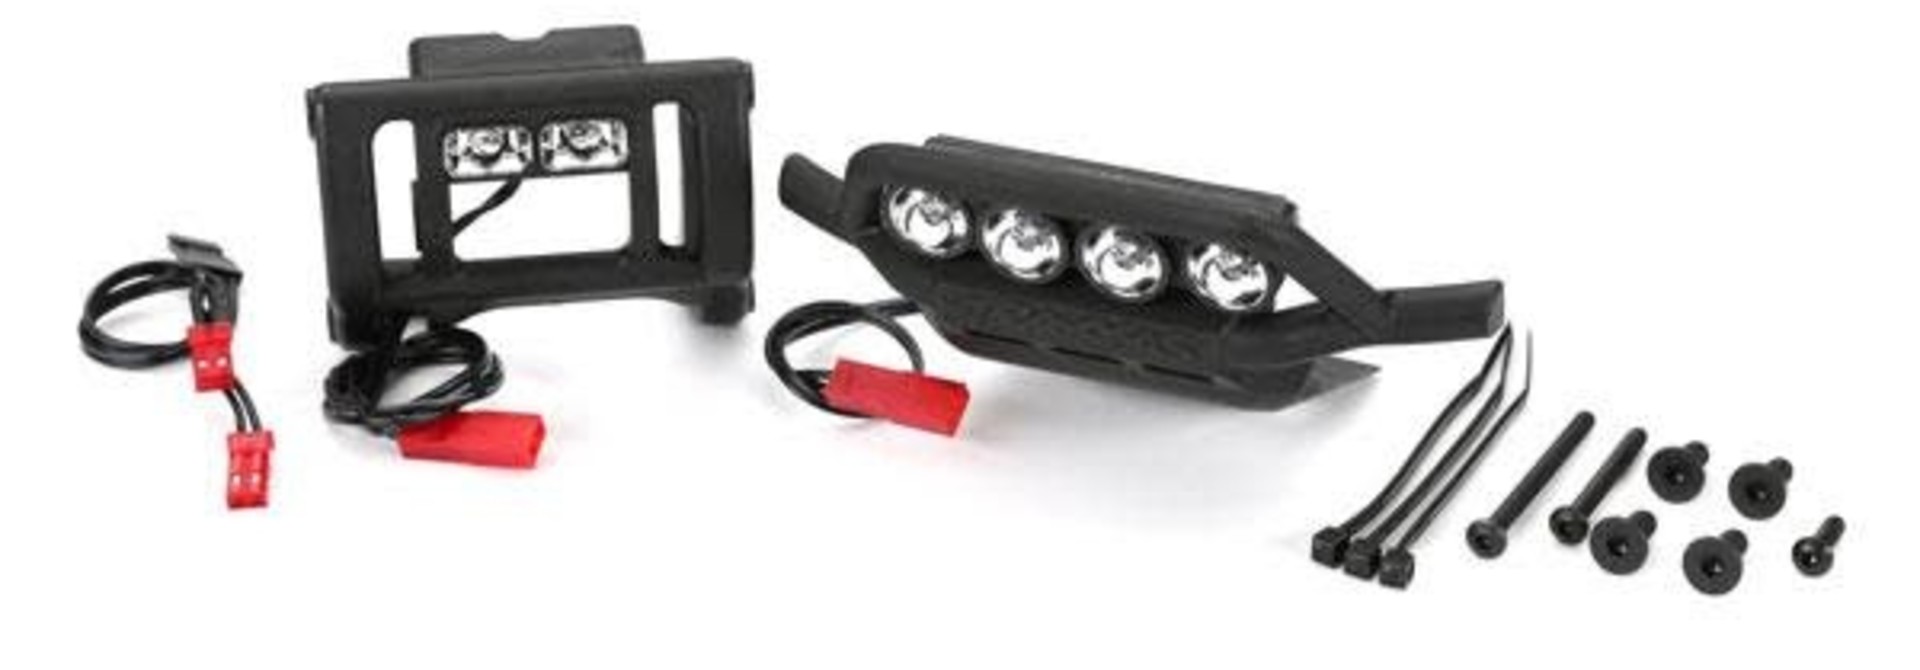 LED light set, complete (includes front and rear bumpers with LED light bar, rear LED harness, & BEC Y-harness) (fits 2WD Rustler or Bandit)